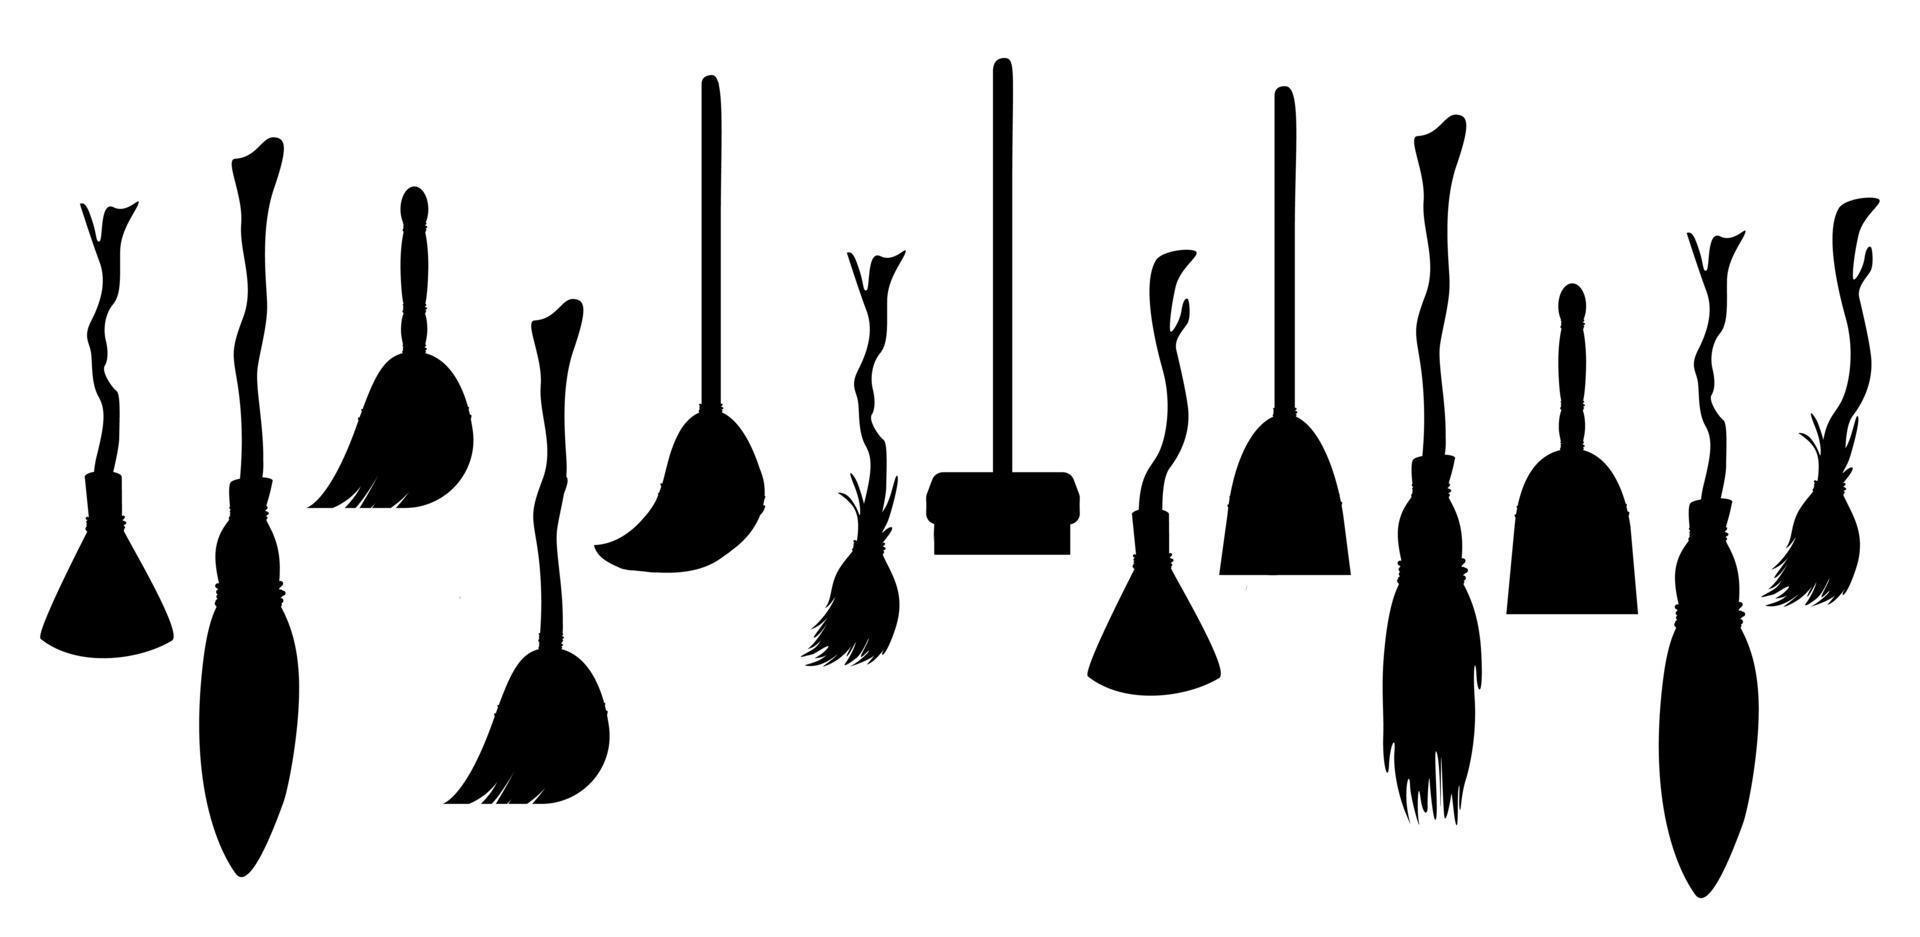 Vector image of a set of black silhouettes of brooms